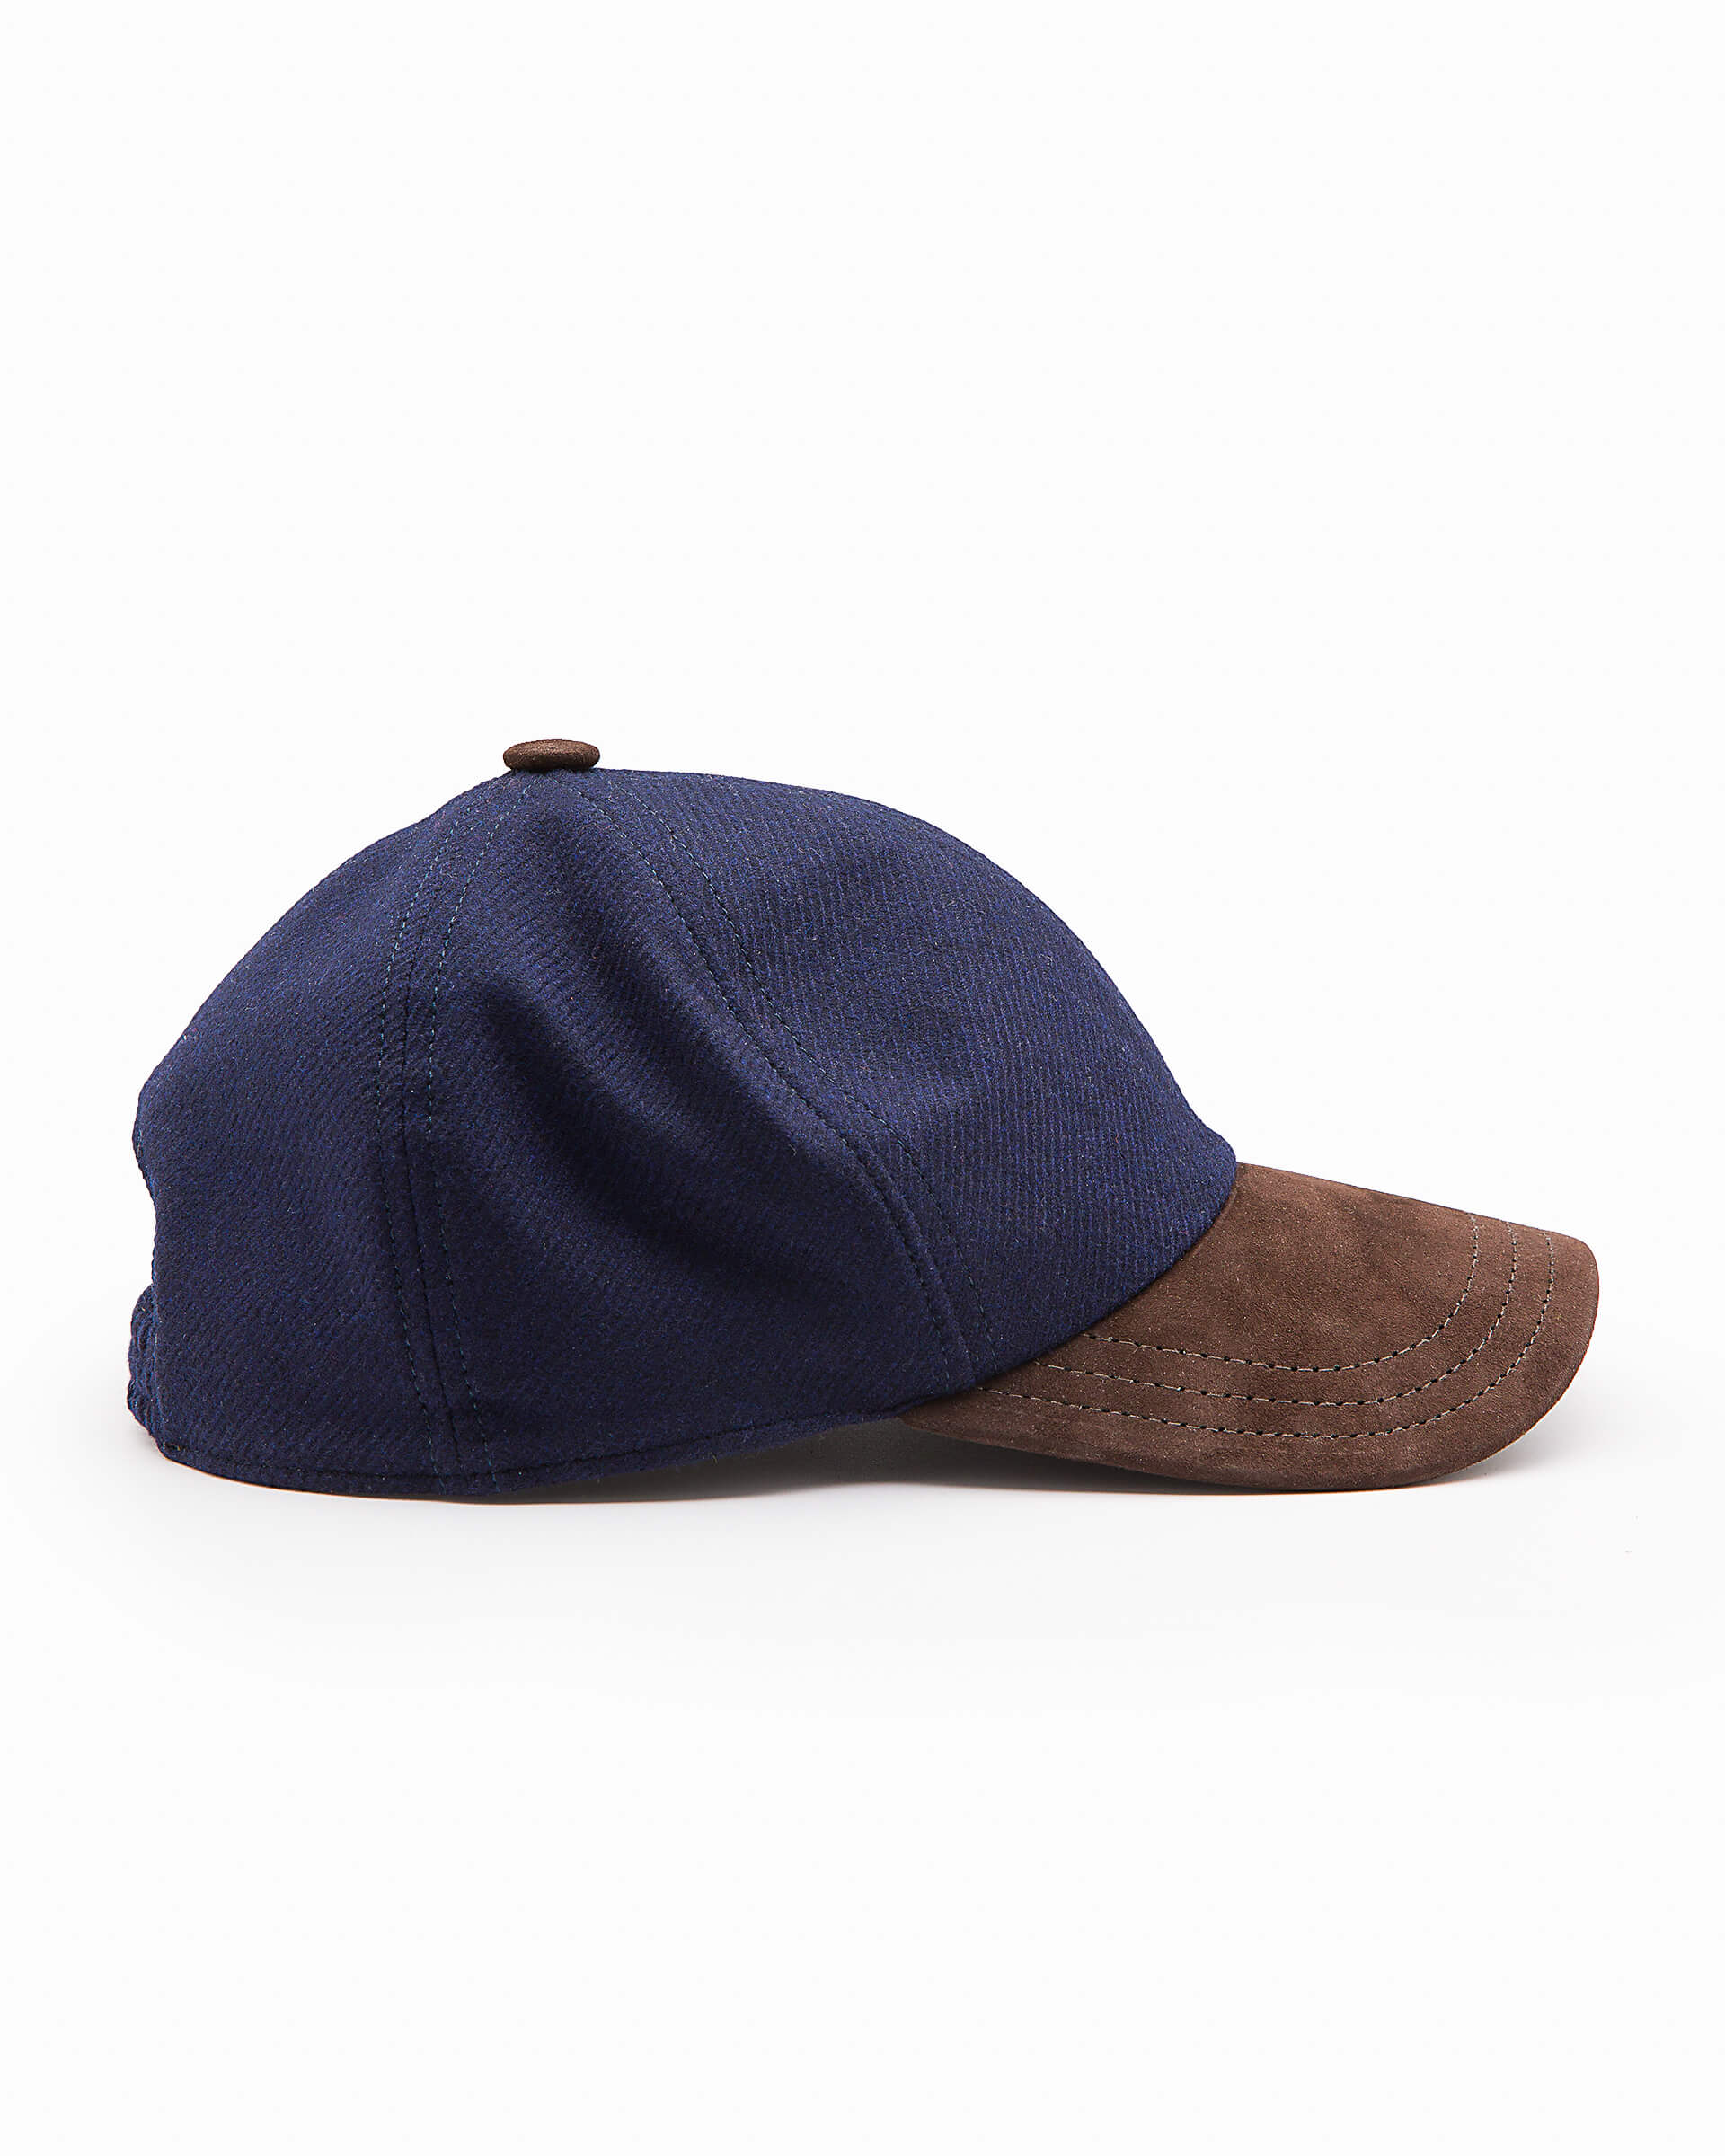 cap visor Ventura hat with water-repellent of cashmere blue made - Andrea Firenze Baseball eclipse